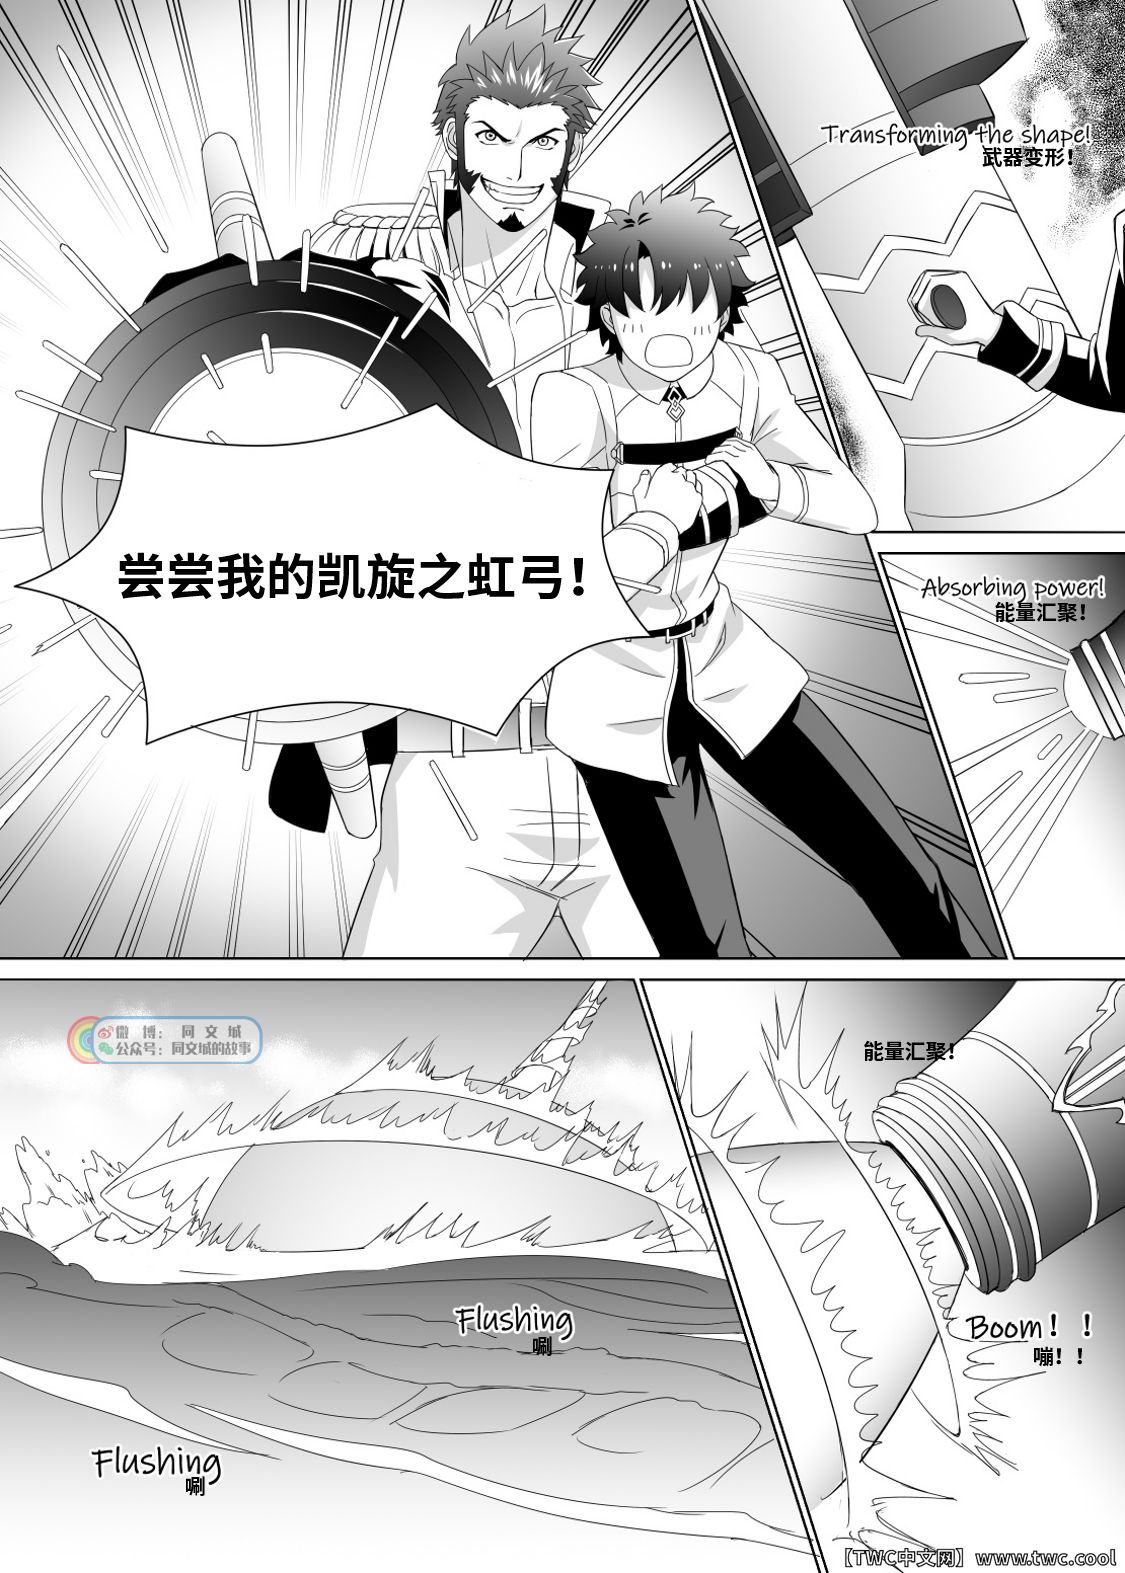 [Jtu] Ready to conquer (Fate/Grand Order) [Chinese] [同文城] [Digital] [Jtu] Ready to conquer (Fate Grand Order) [Chinese] [中国翻訳] [同文城]